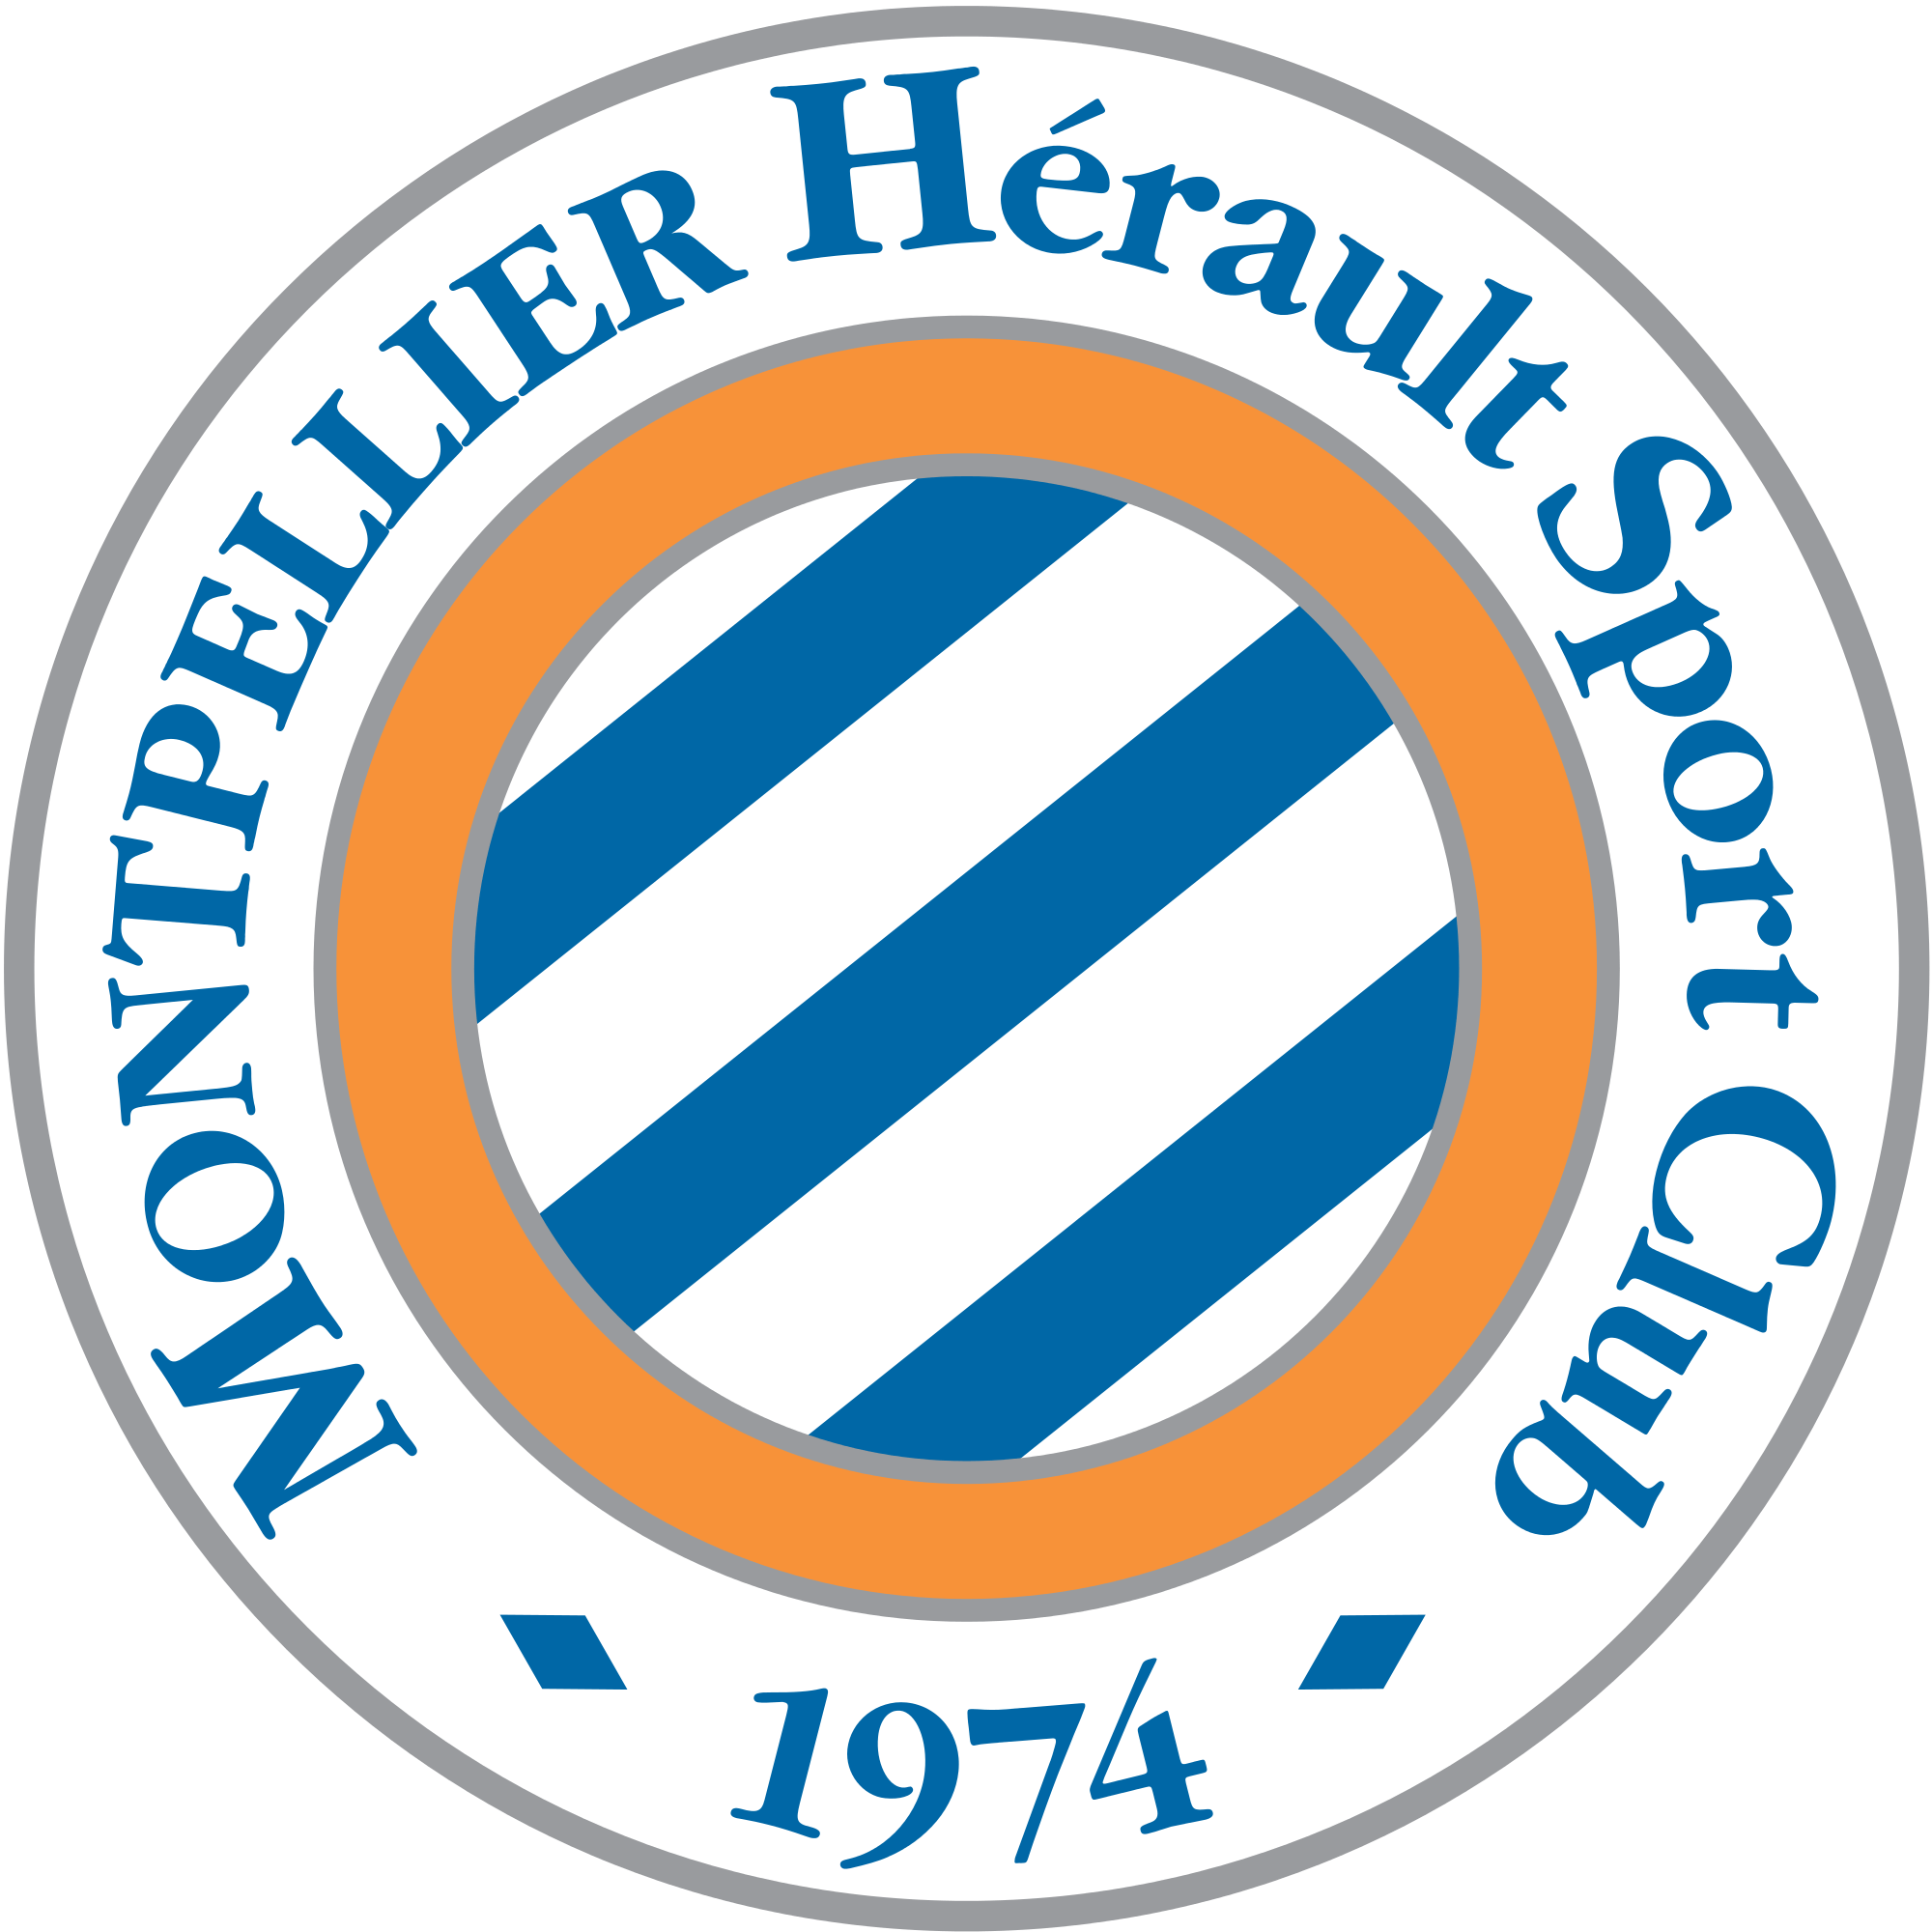 Foot Circle Logo - File:Montpellier Hérault Sport Club (logo, 2000).svg - Wikimedia Commons